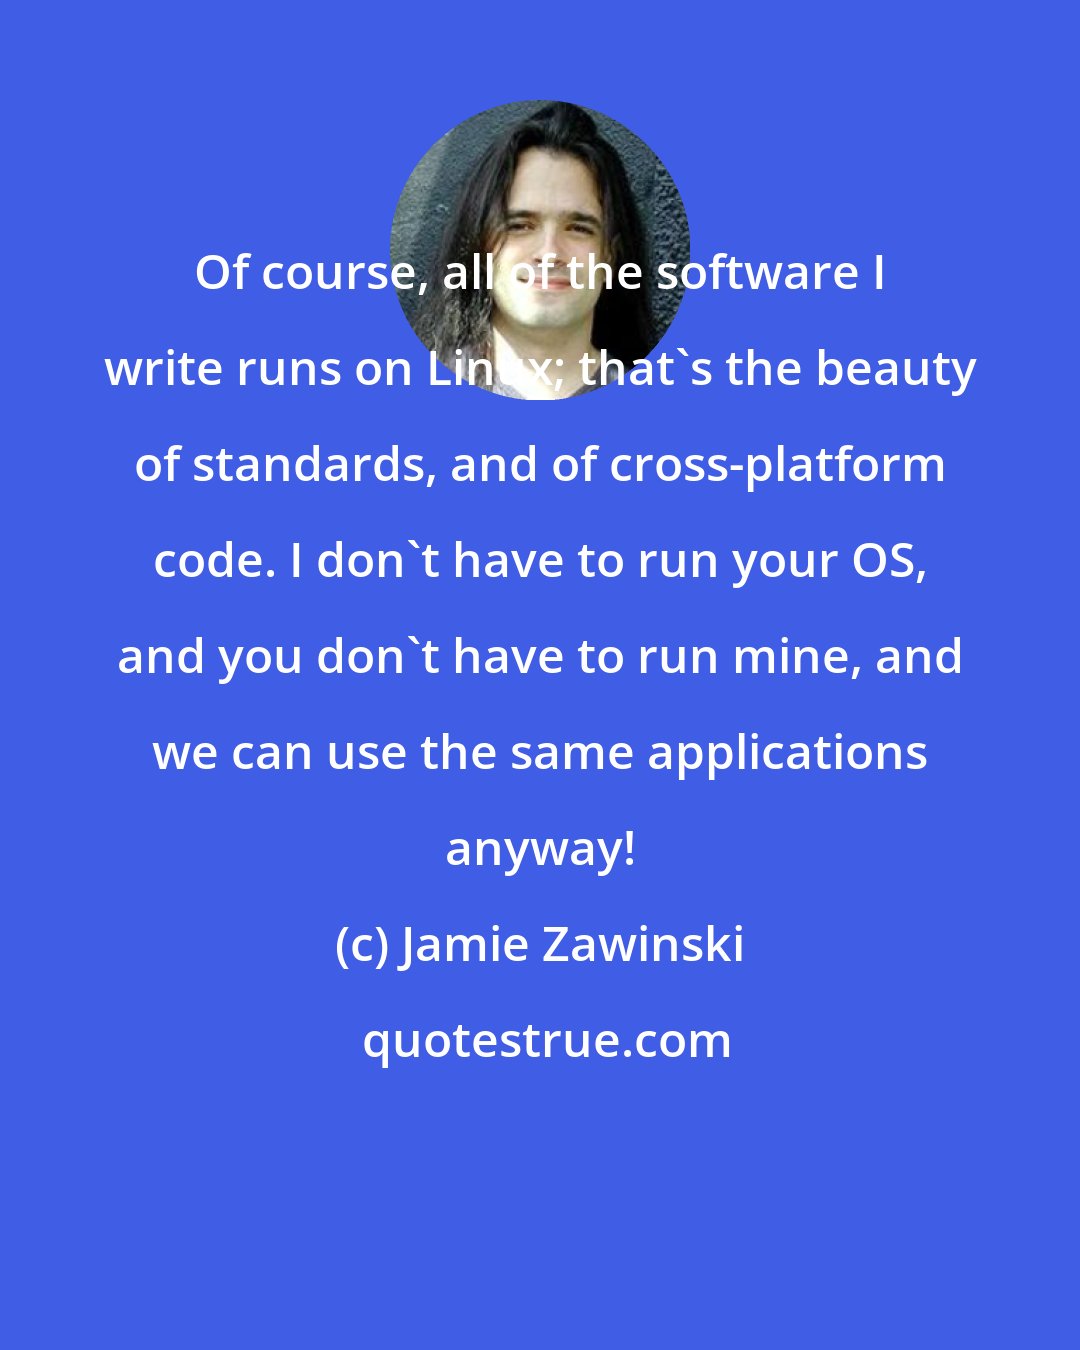 Jamie Zawinski: Of course, all of the software I write runs on Linux; that's the beauty of standards, and of cross-platform code. I don't have to run your OS, and you don't have to run mine, and we can use the same applications anyway!